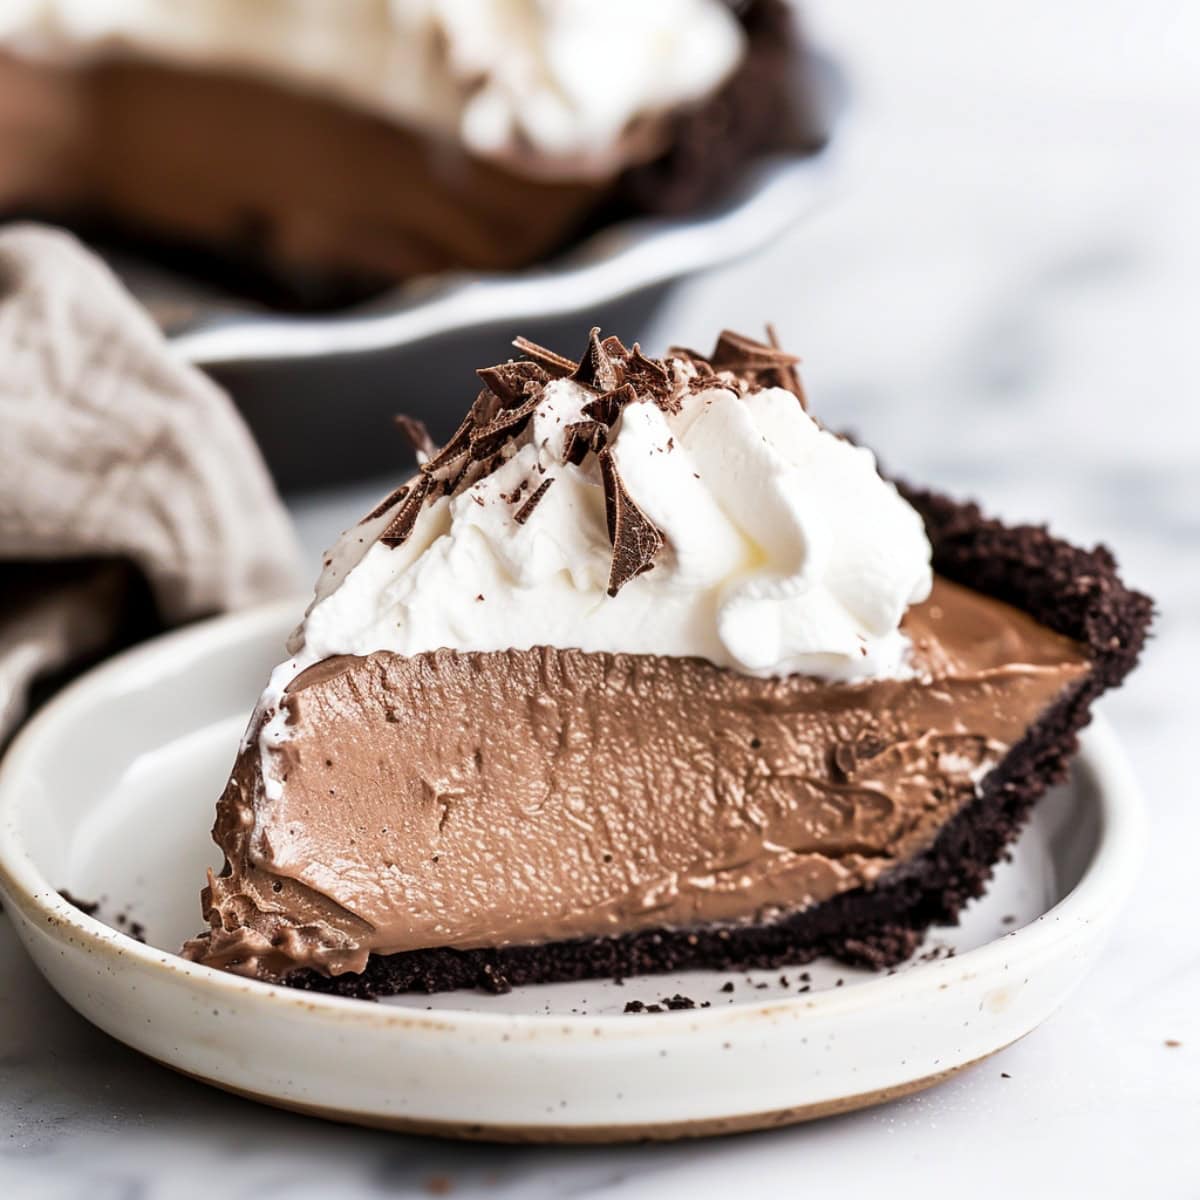 French silk pie with a Oreo crust and a smooth, glossy chocolate filling.